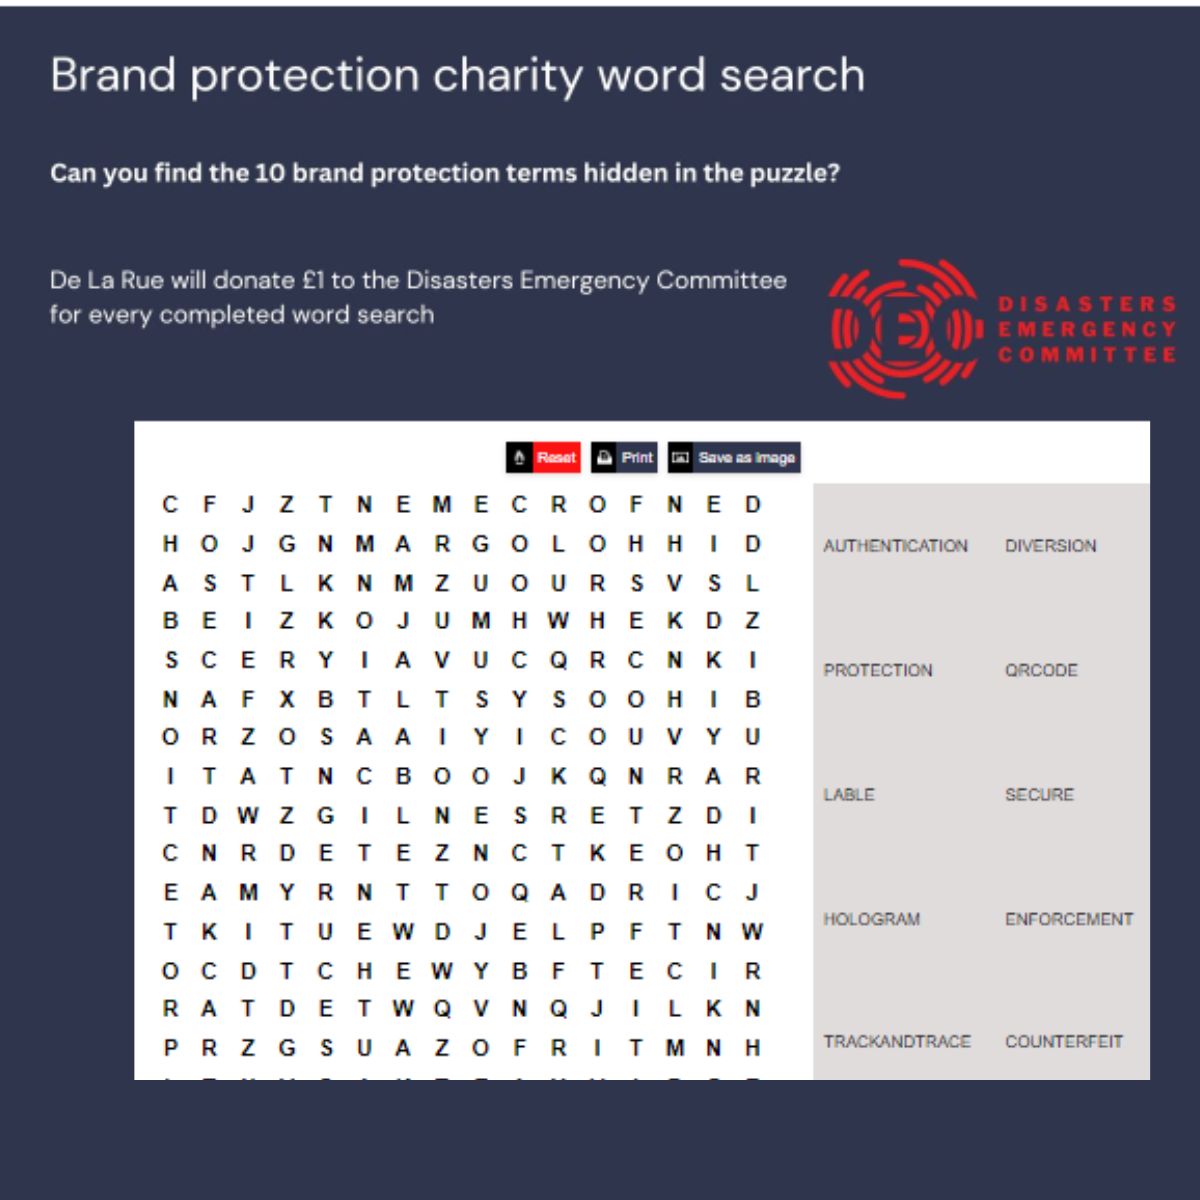 Put your brand protection knowledge to the test with De La Rue's charity word search! Find 10 key terms related to brand protection in our puzzle. We encourage you to share this challenge to magnify the impact! 👥hubs.ly/Q02dt4J10 #DeLaRue